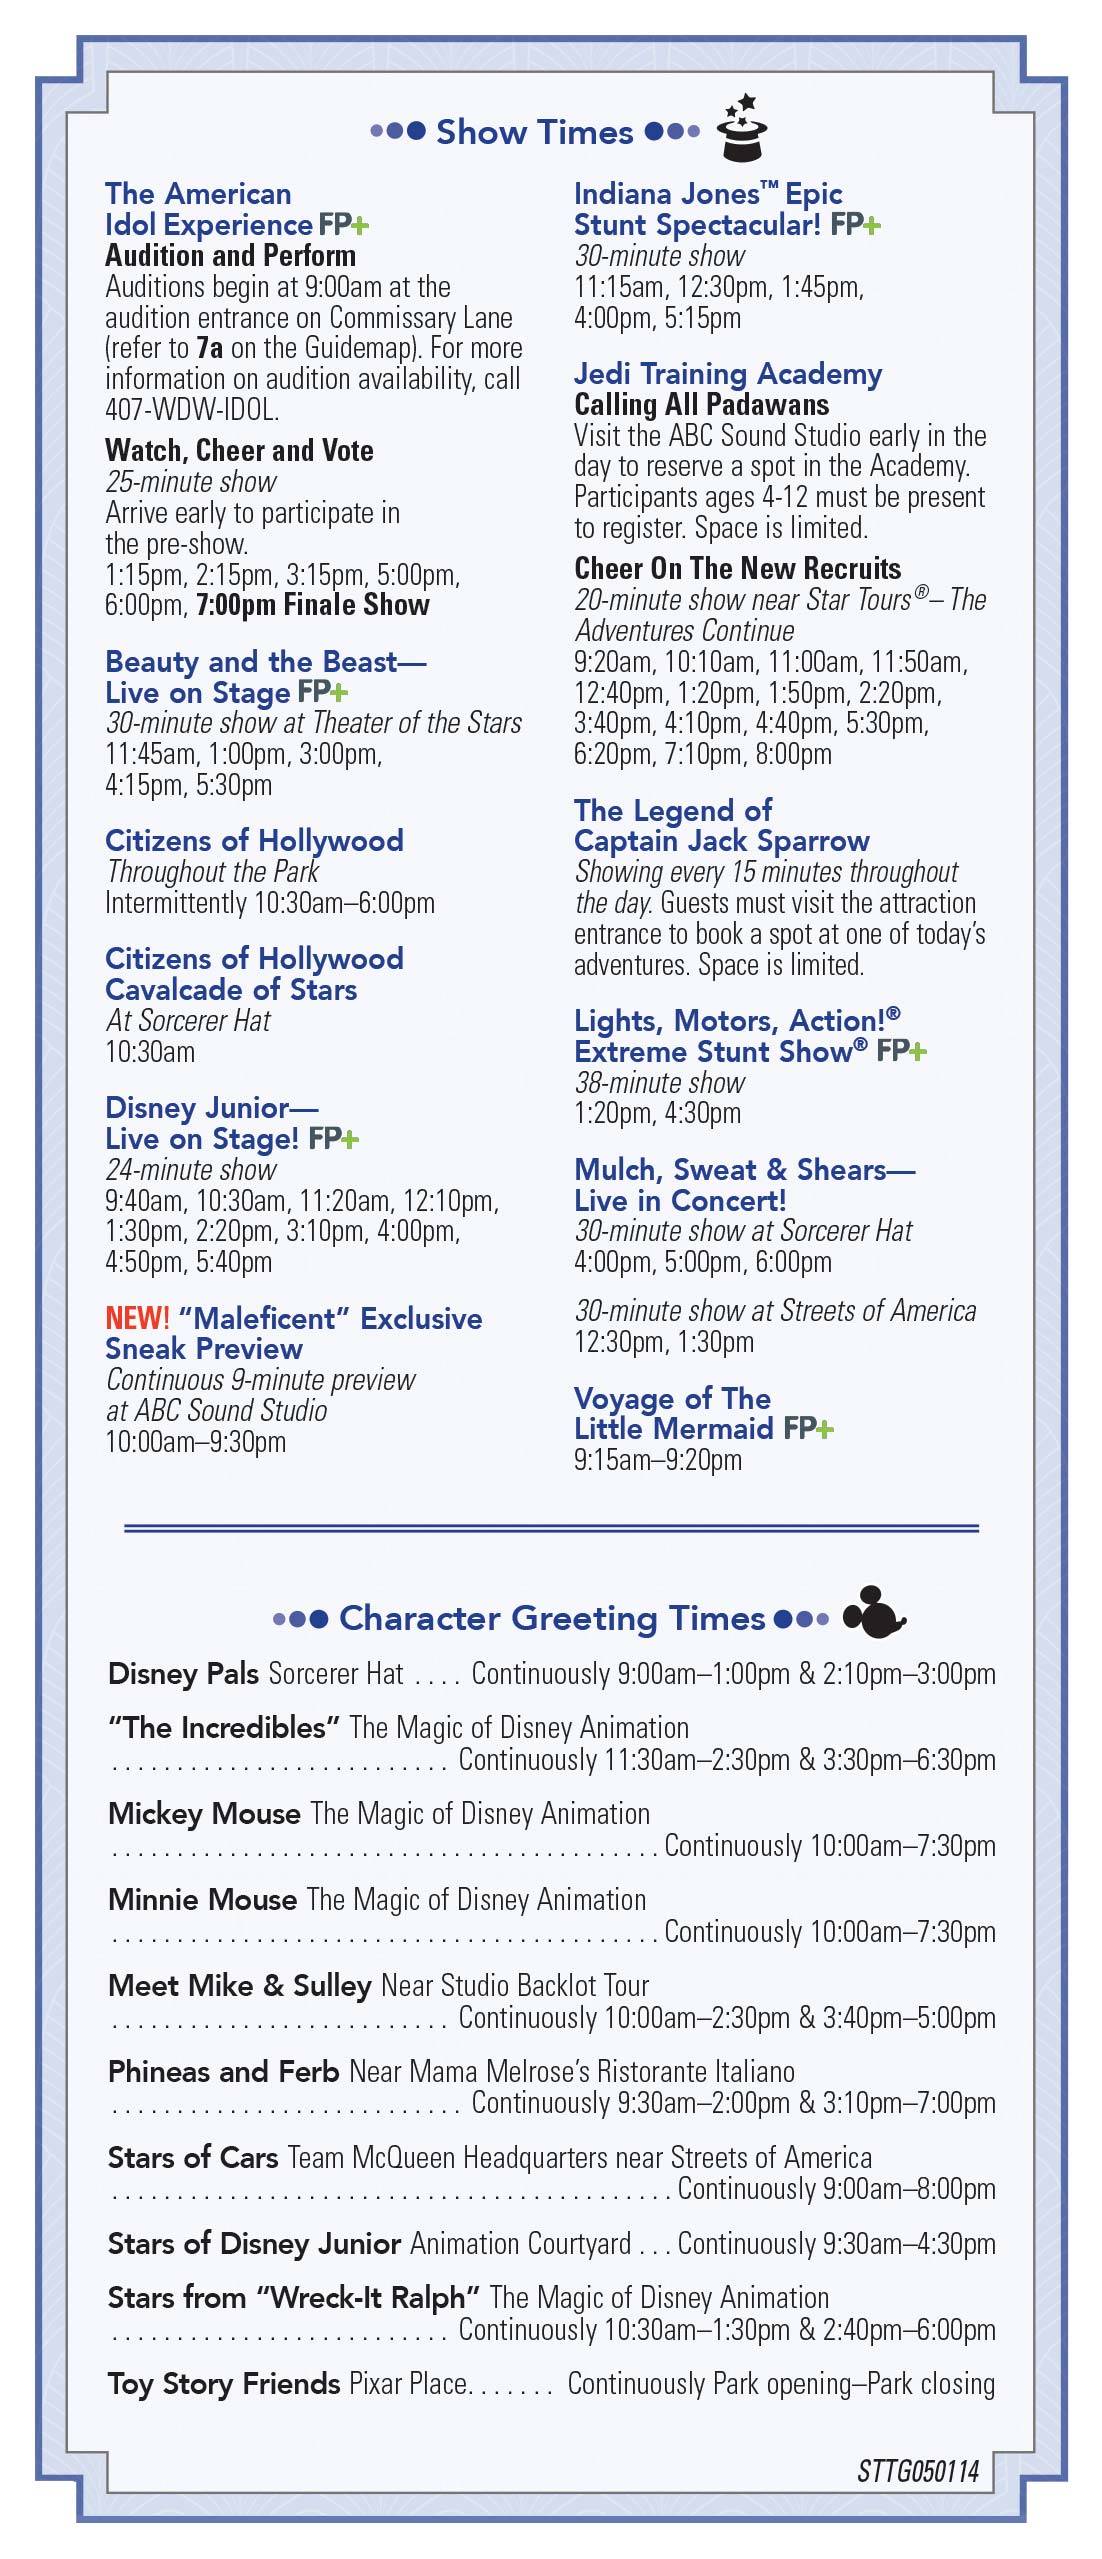 PHOTOS - Disney's Hollywood Studios 25th anniversary times guide